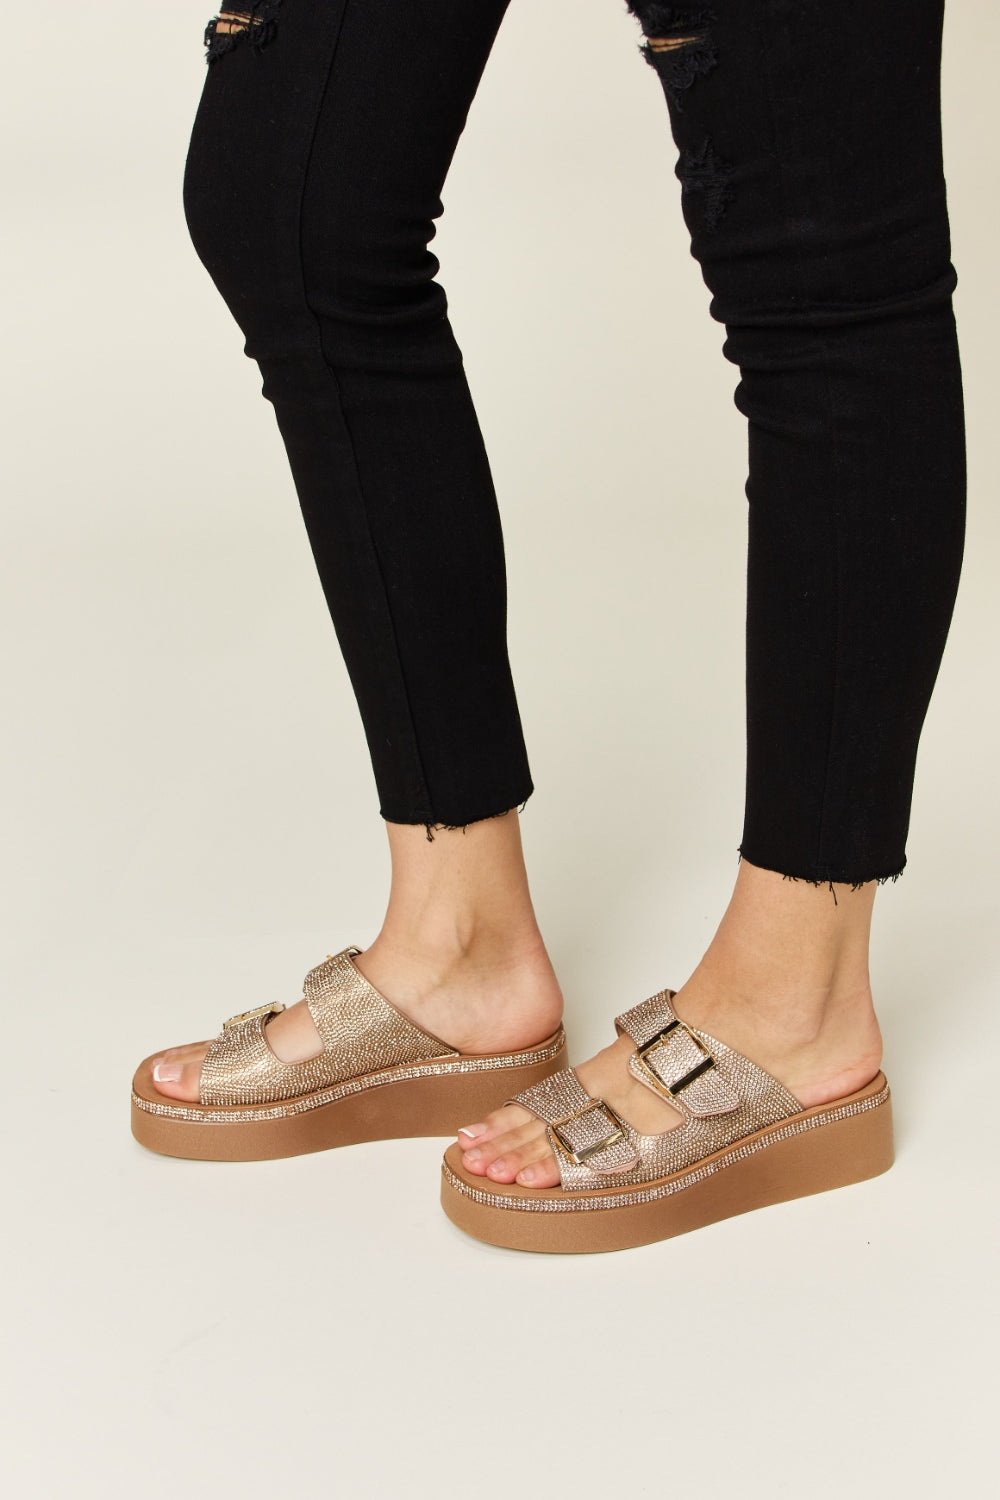 Sparks fly Wedge Sandals